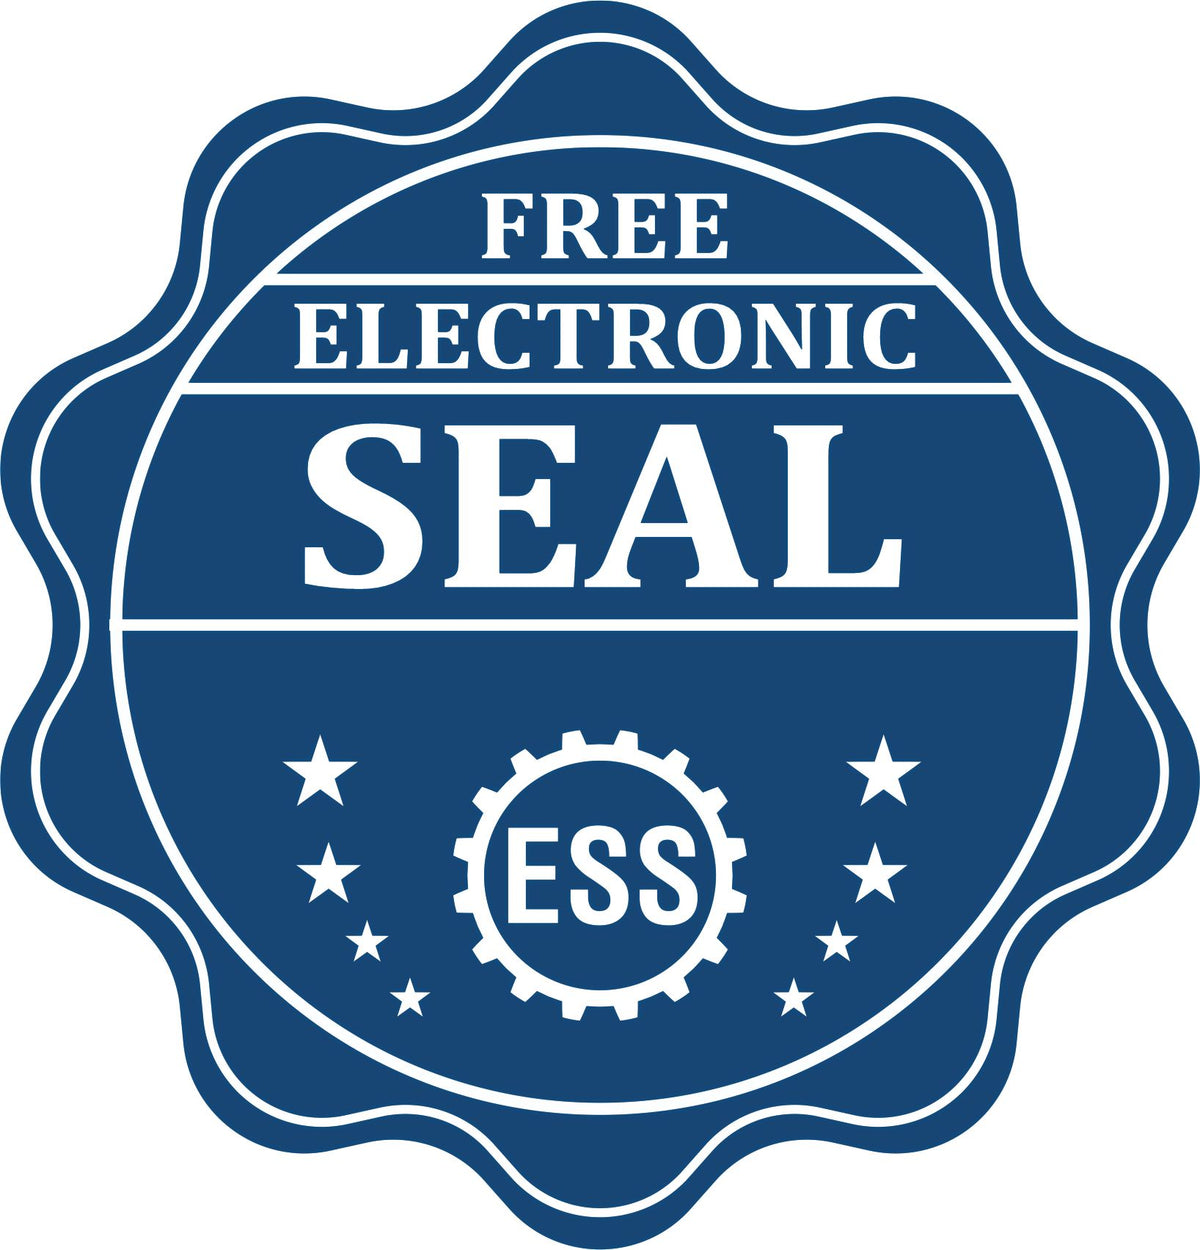 A badge showing a free electronic seal for the Slim Pre-Inked Idaho Landscape Architect Seal Stamp with stars and the ESS gear on the emblem.